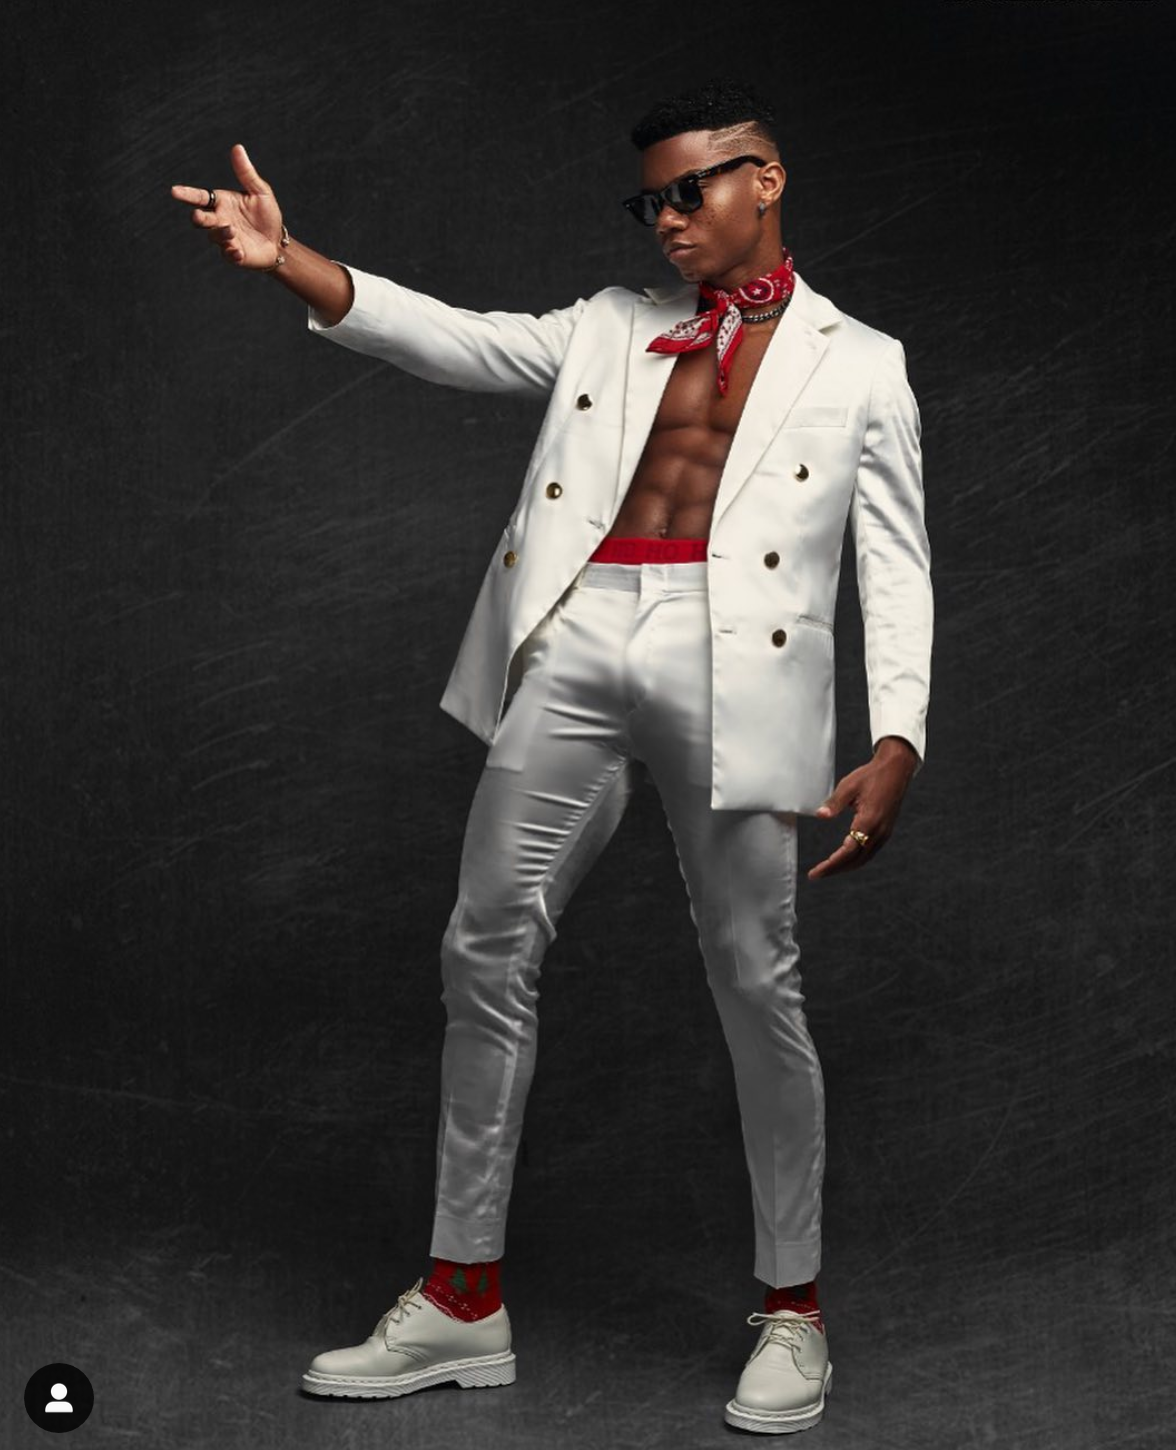 10 Images That Prove Ghana's Kidi Is Truly a Fashion Icon 7